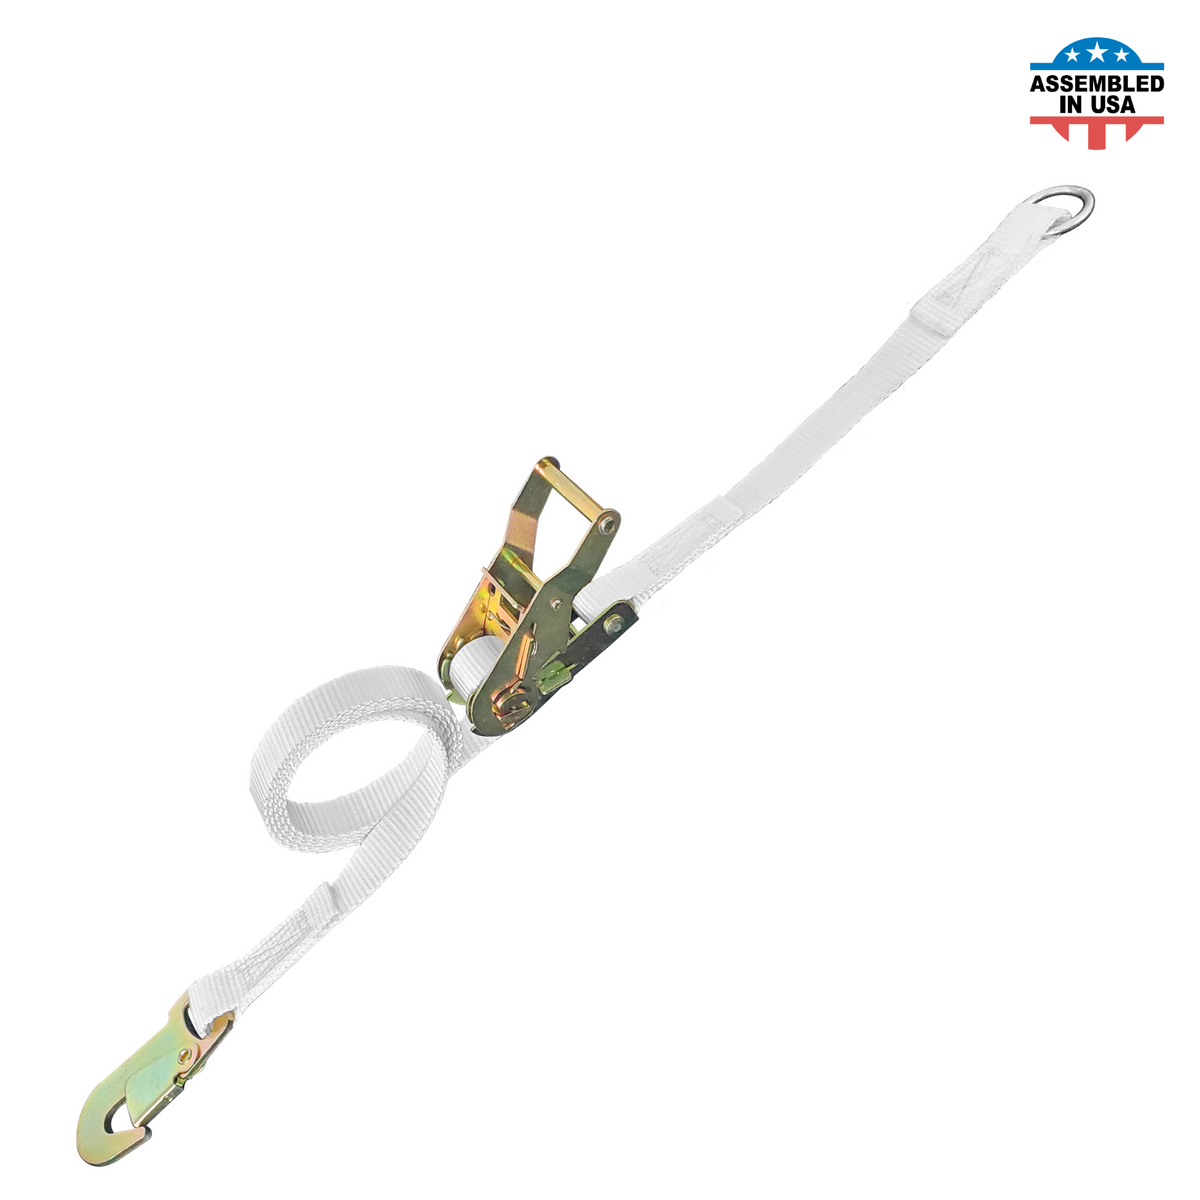 1" Ratchet Tent Strap with O-Ring fitting and Snap Hook strap